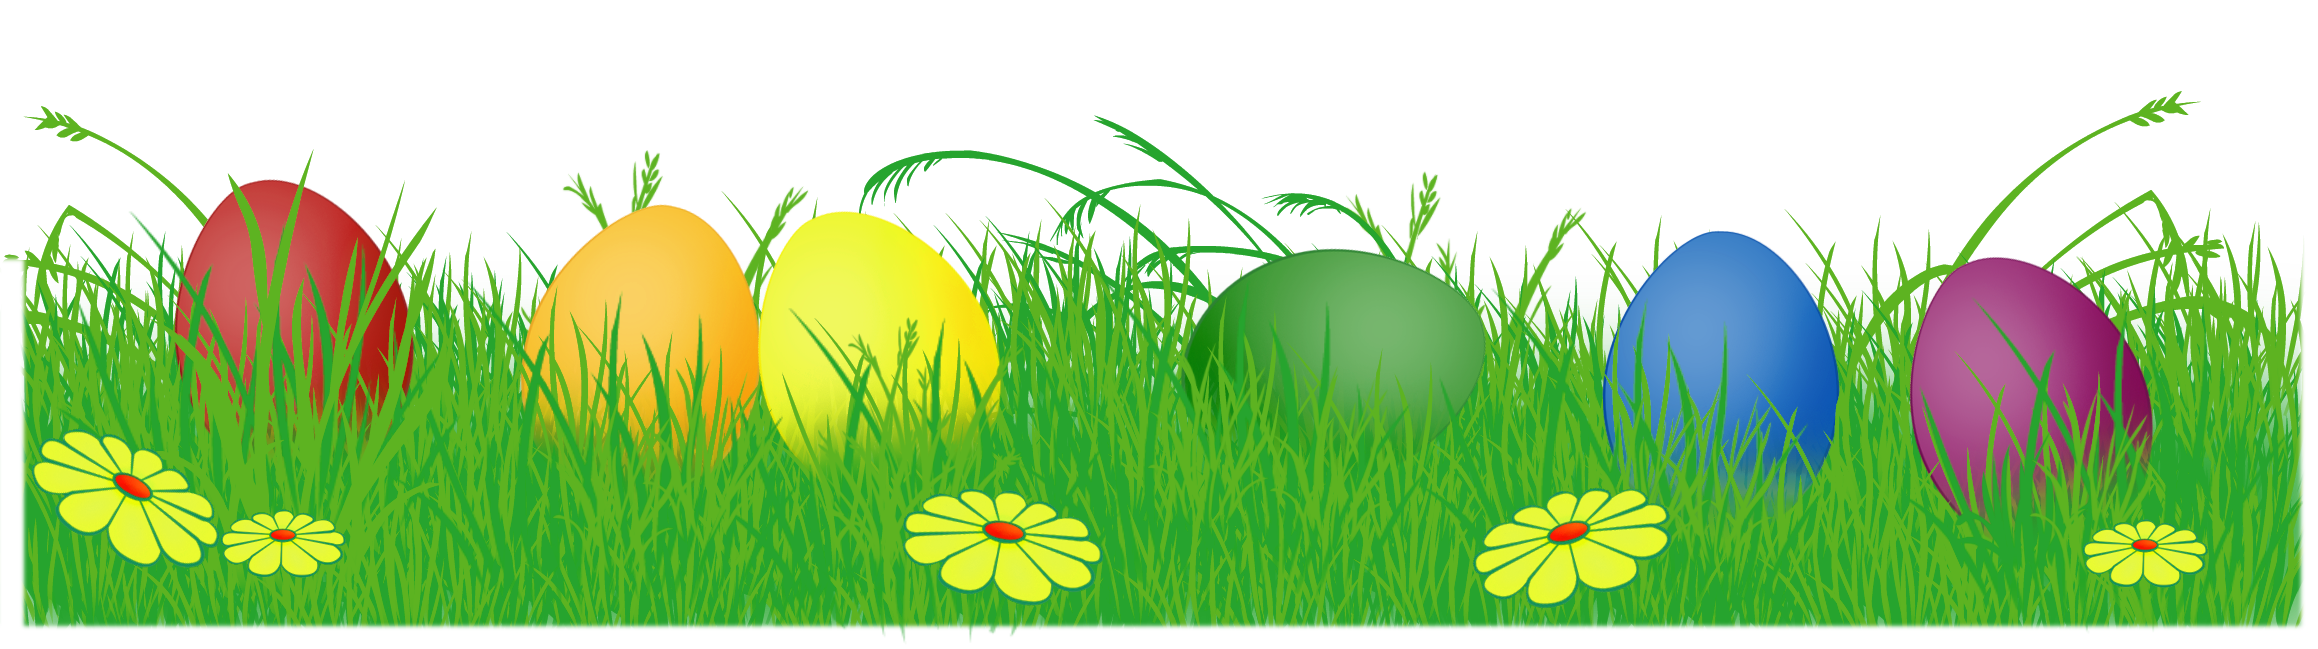 Easter Borders of Green Grass and Eggs, Vectors